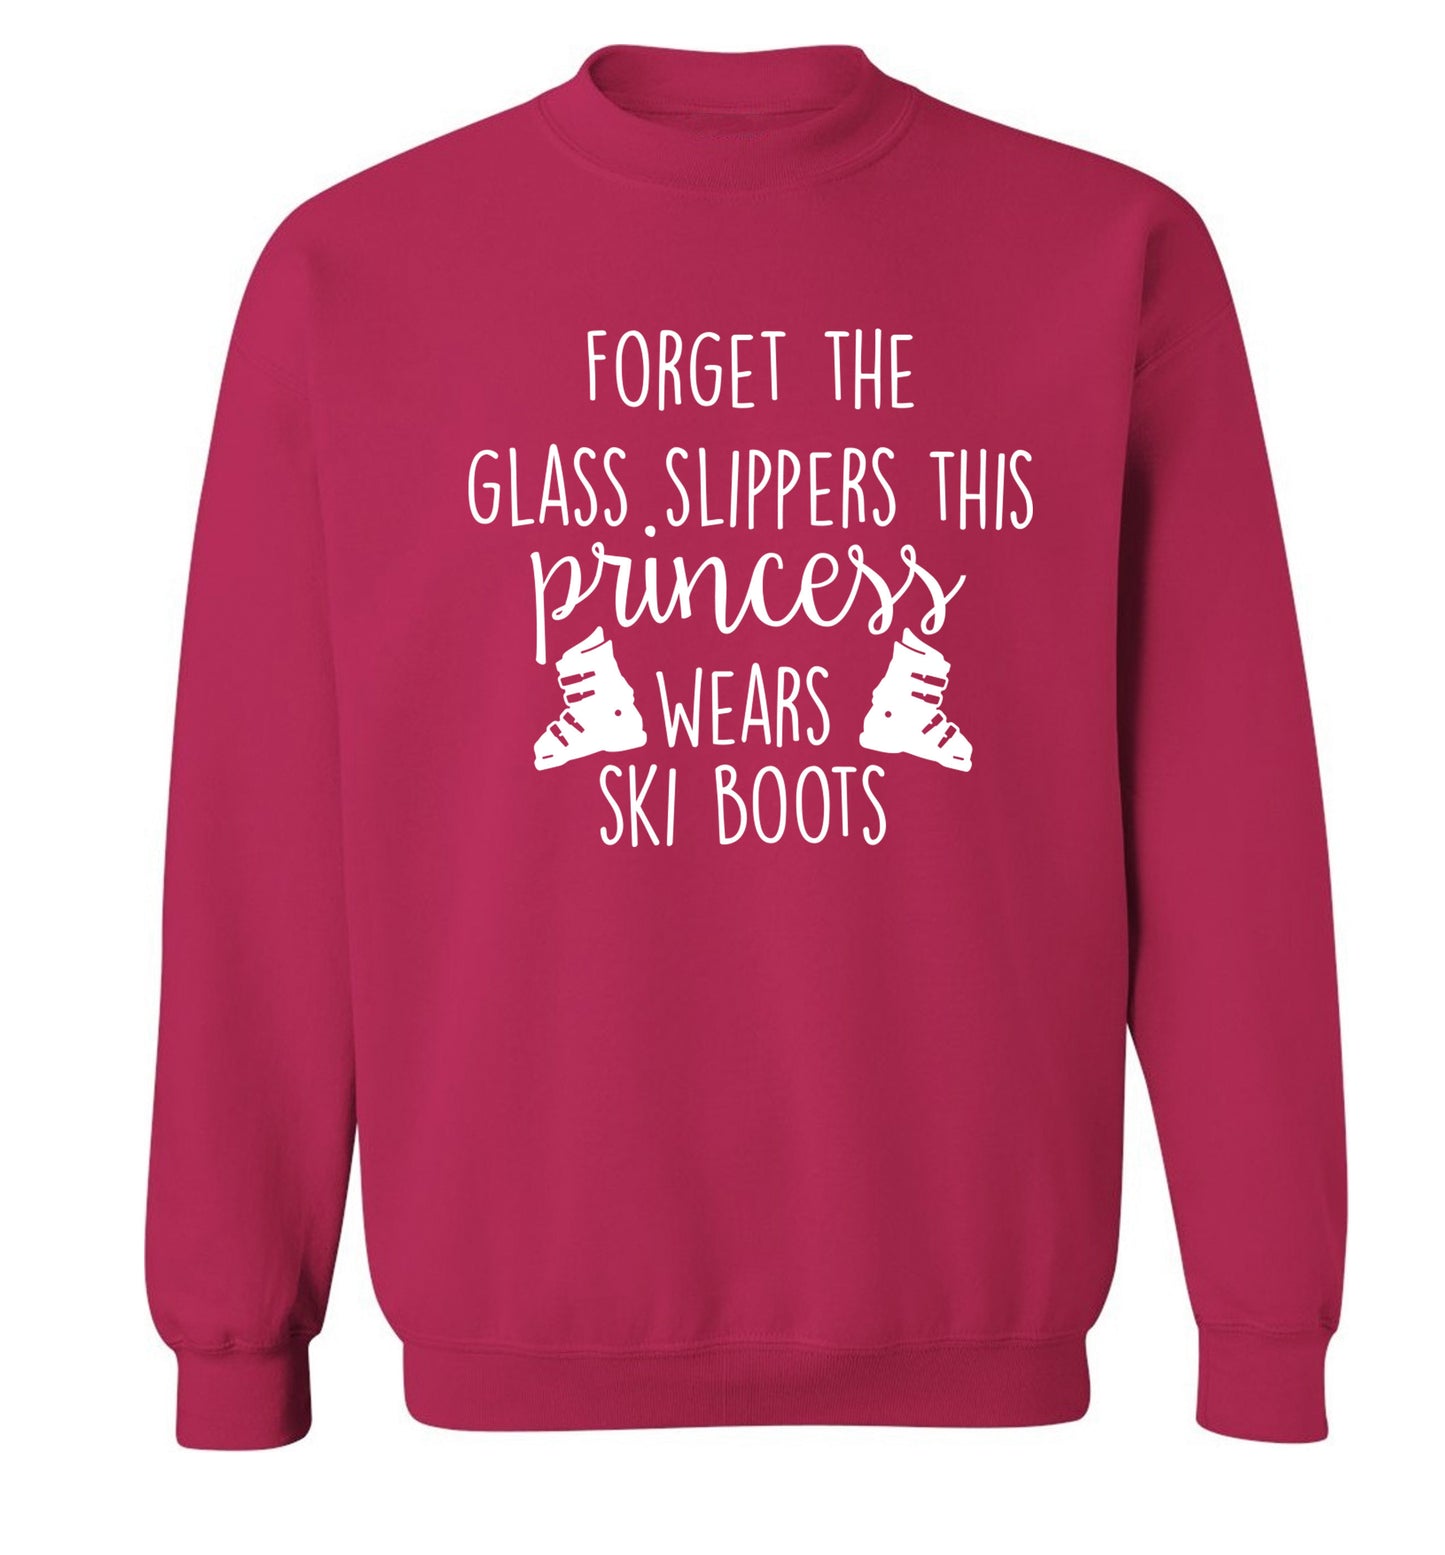 Forget the glass slippers this princess wears ski boots Adult's unisex pink Sweater 2XL